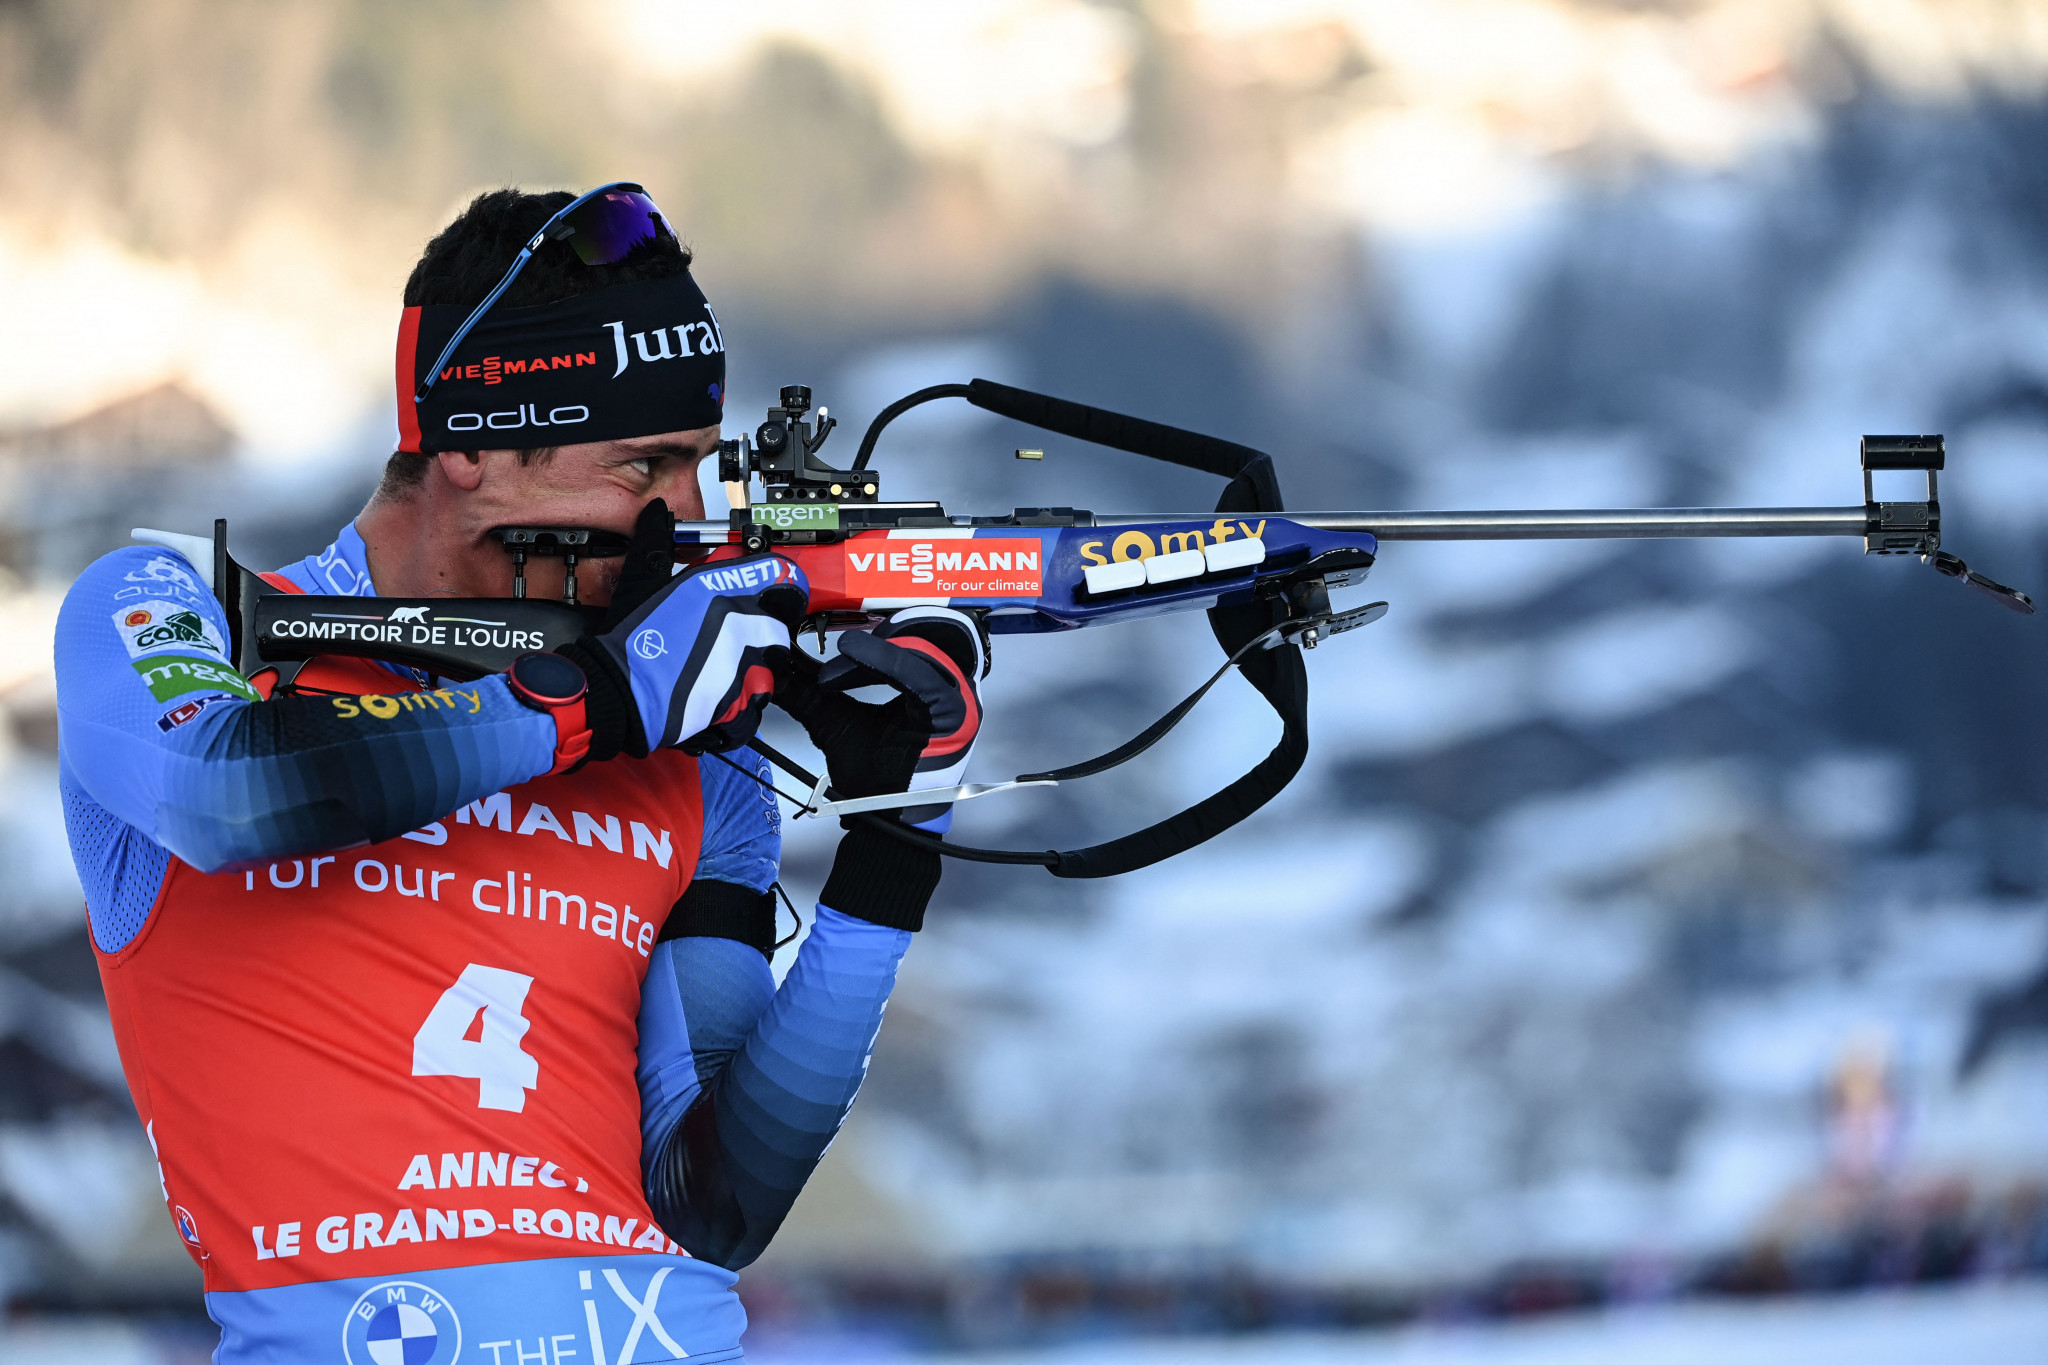 France's Quentin Fillon Maillet has a slim lead in the Biathlon World Cup standings ©Getty Images